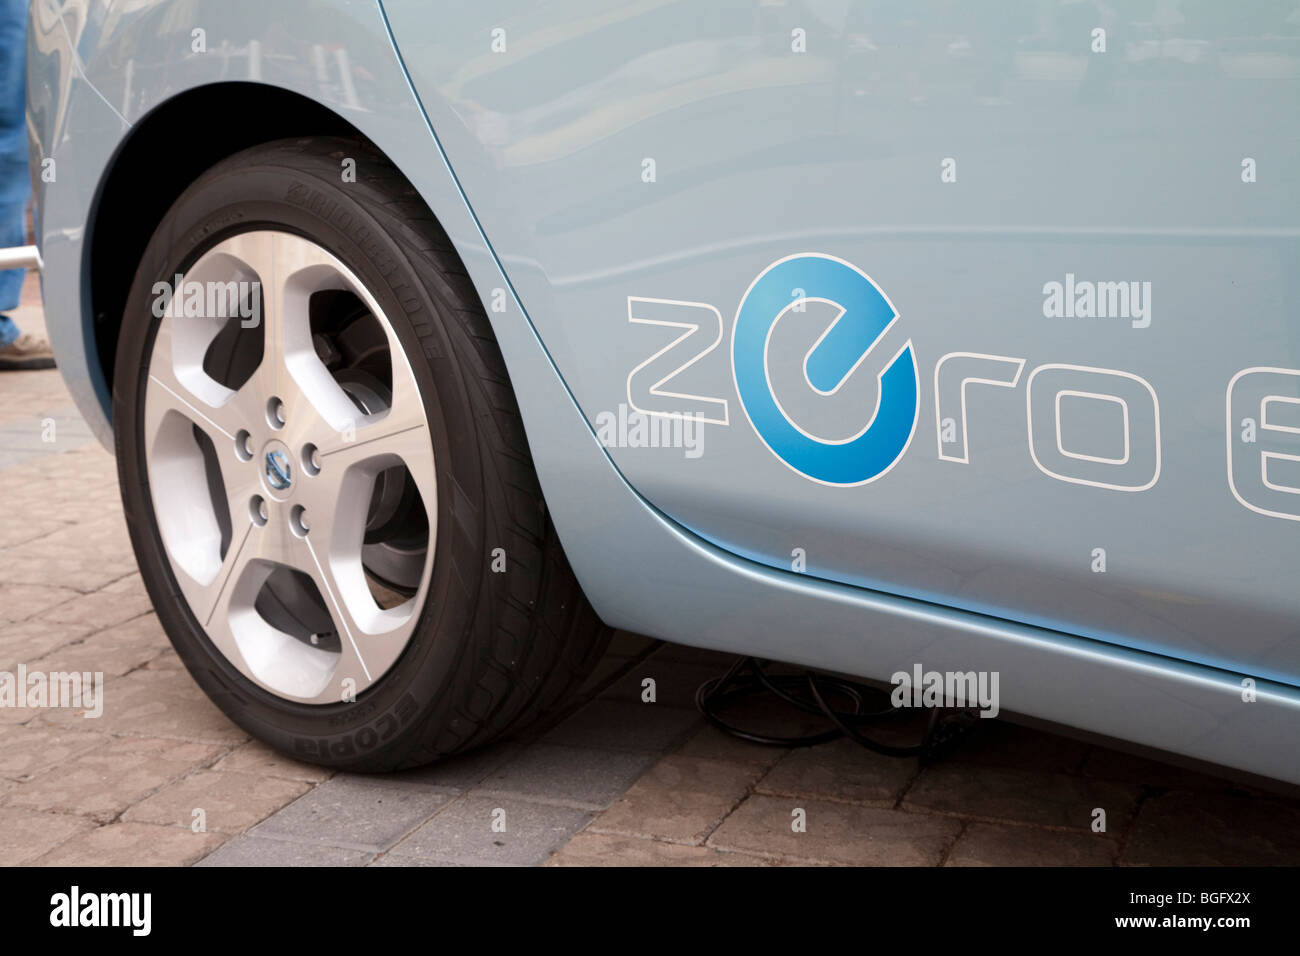 Close up of logo on Nissan Leaf electric car to be released in Fall 2010. Stock Photo